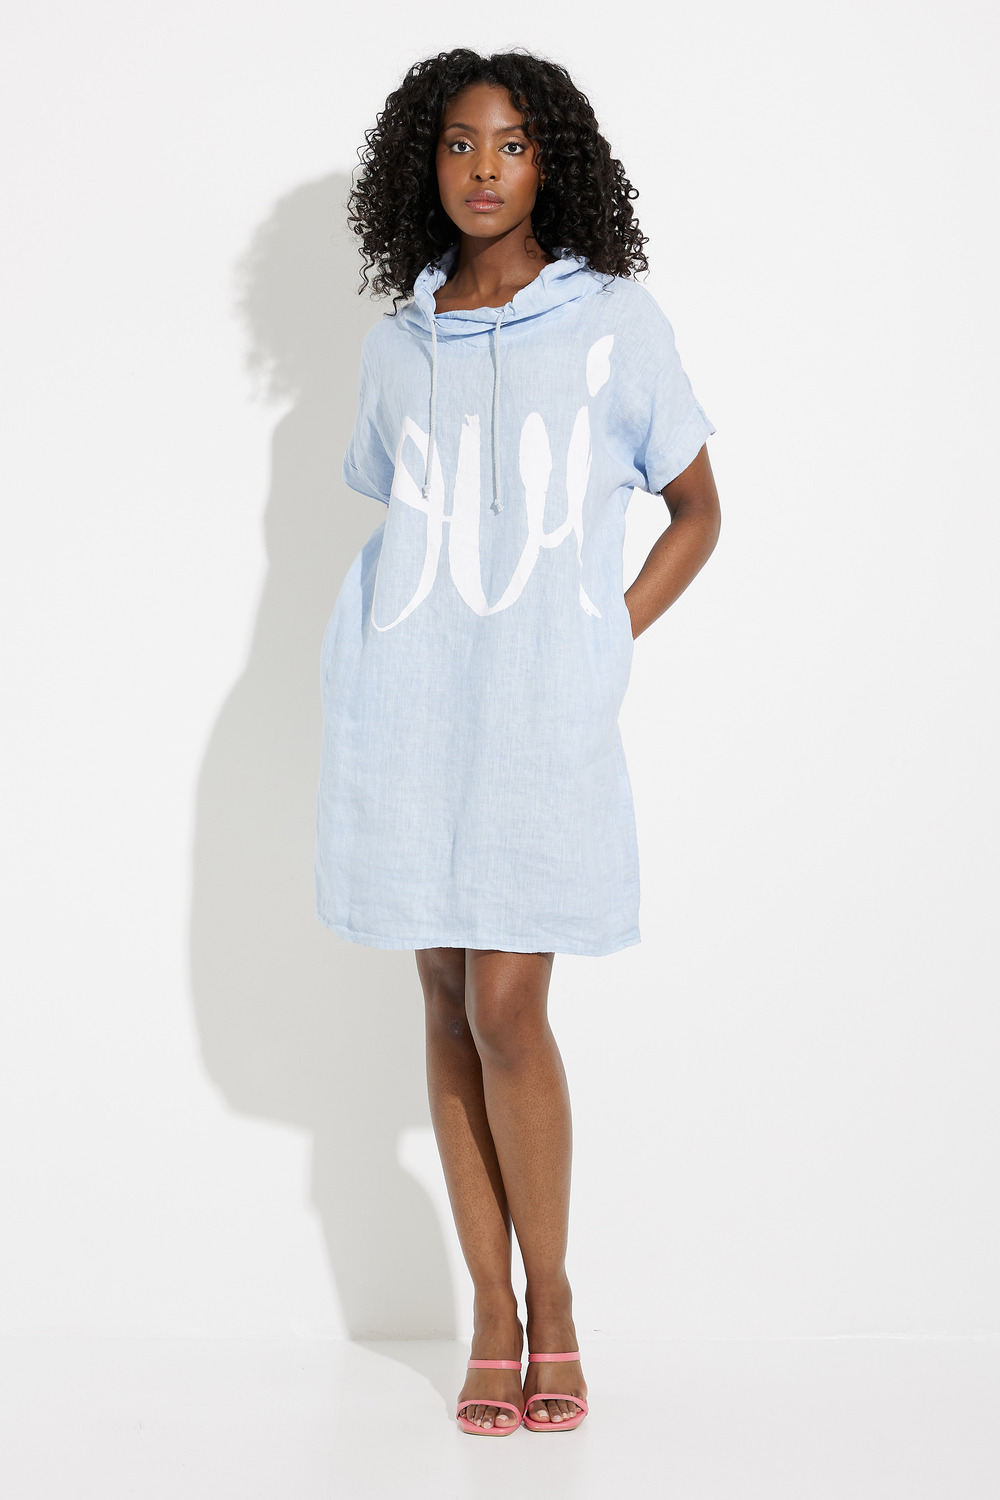 Printed Linen Hooded Dress Style C3146. Cerulean